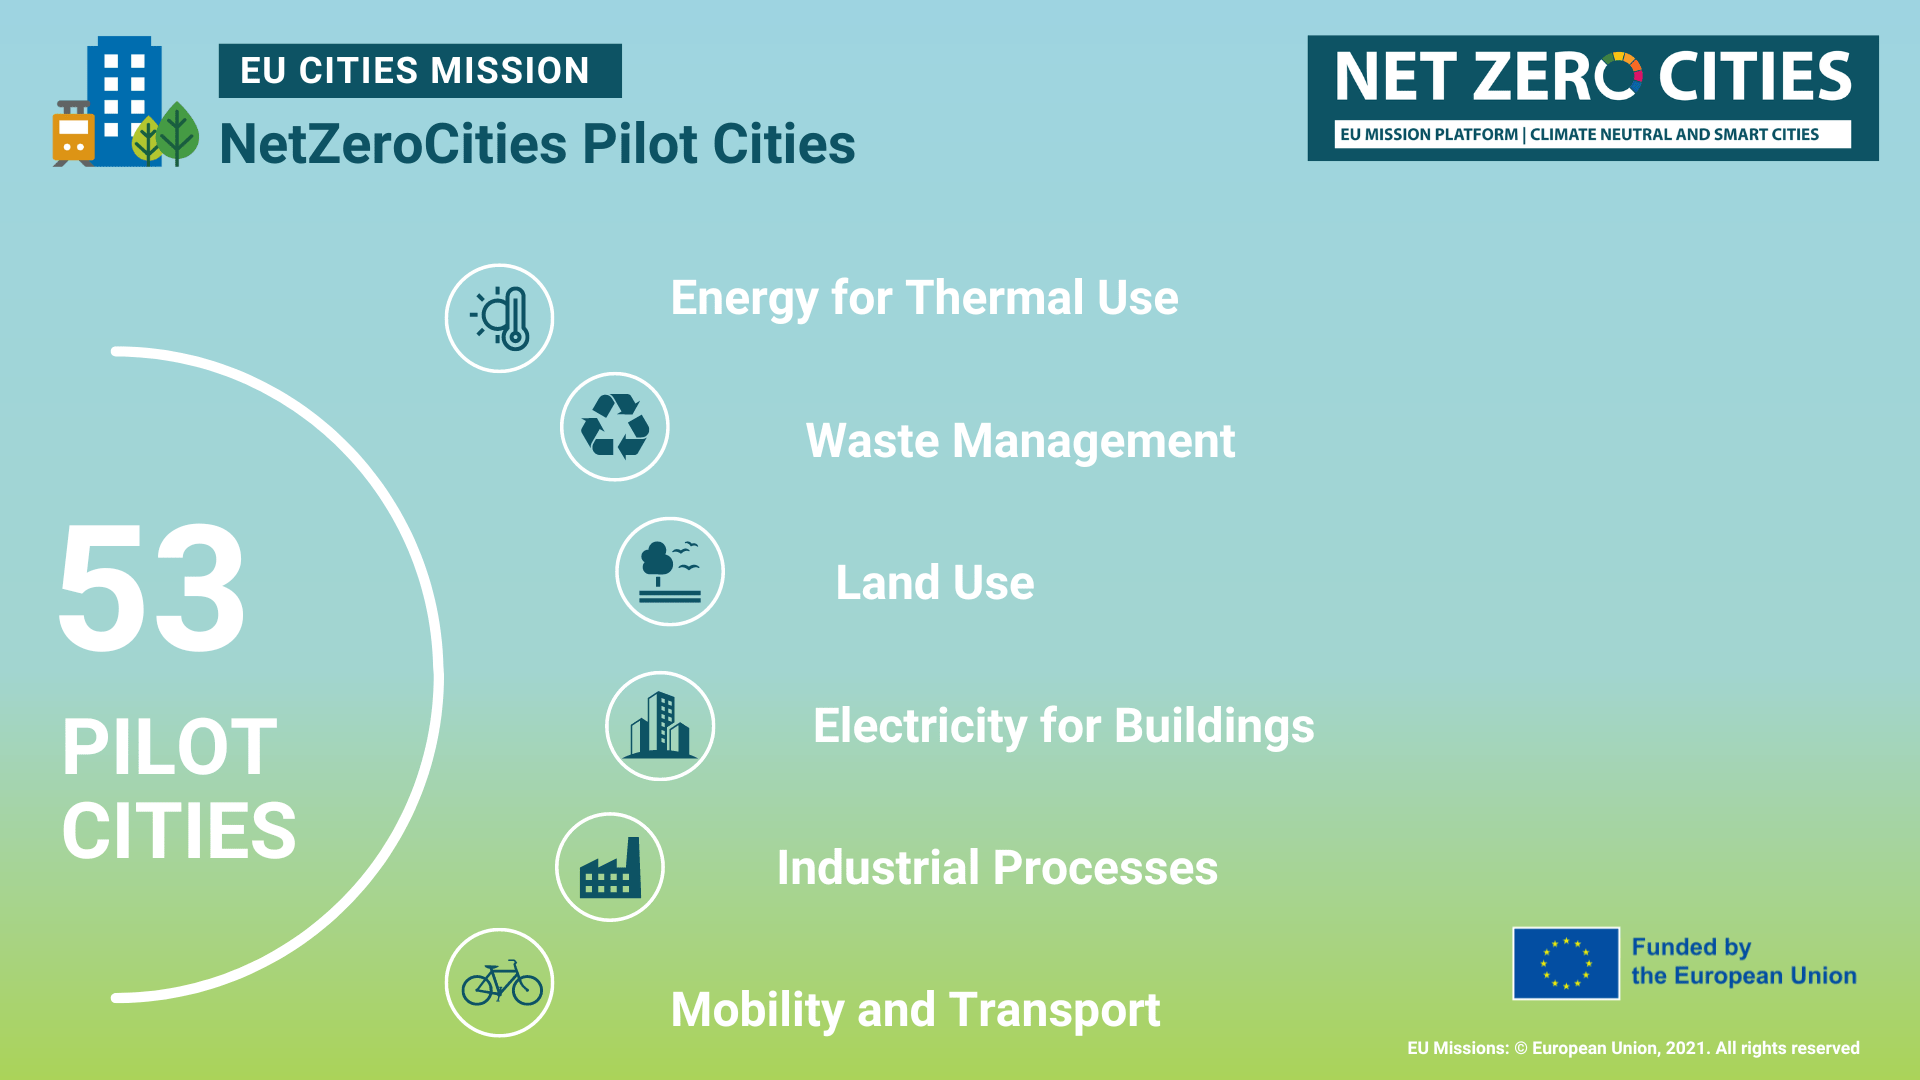 Three of the Viable Cities Climate Neutral Cities 2030 are part of the NetZeroCities Pilot Cities Program.